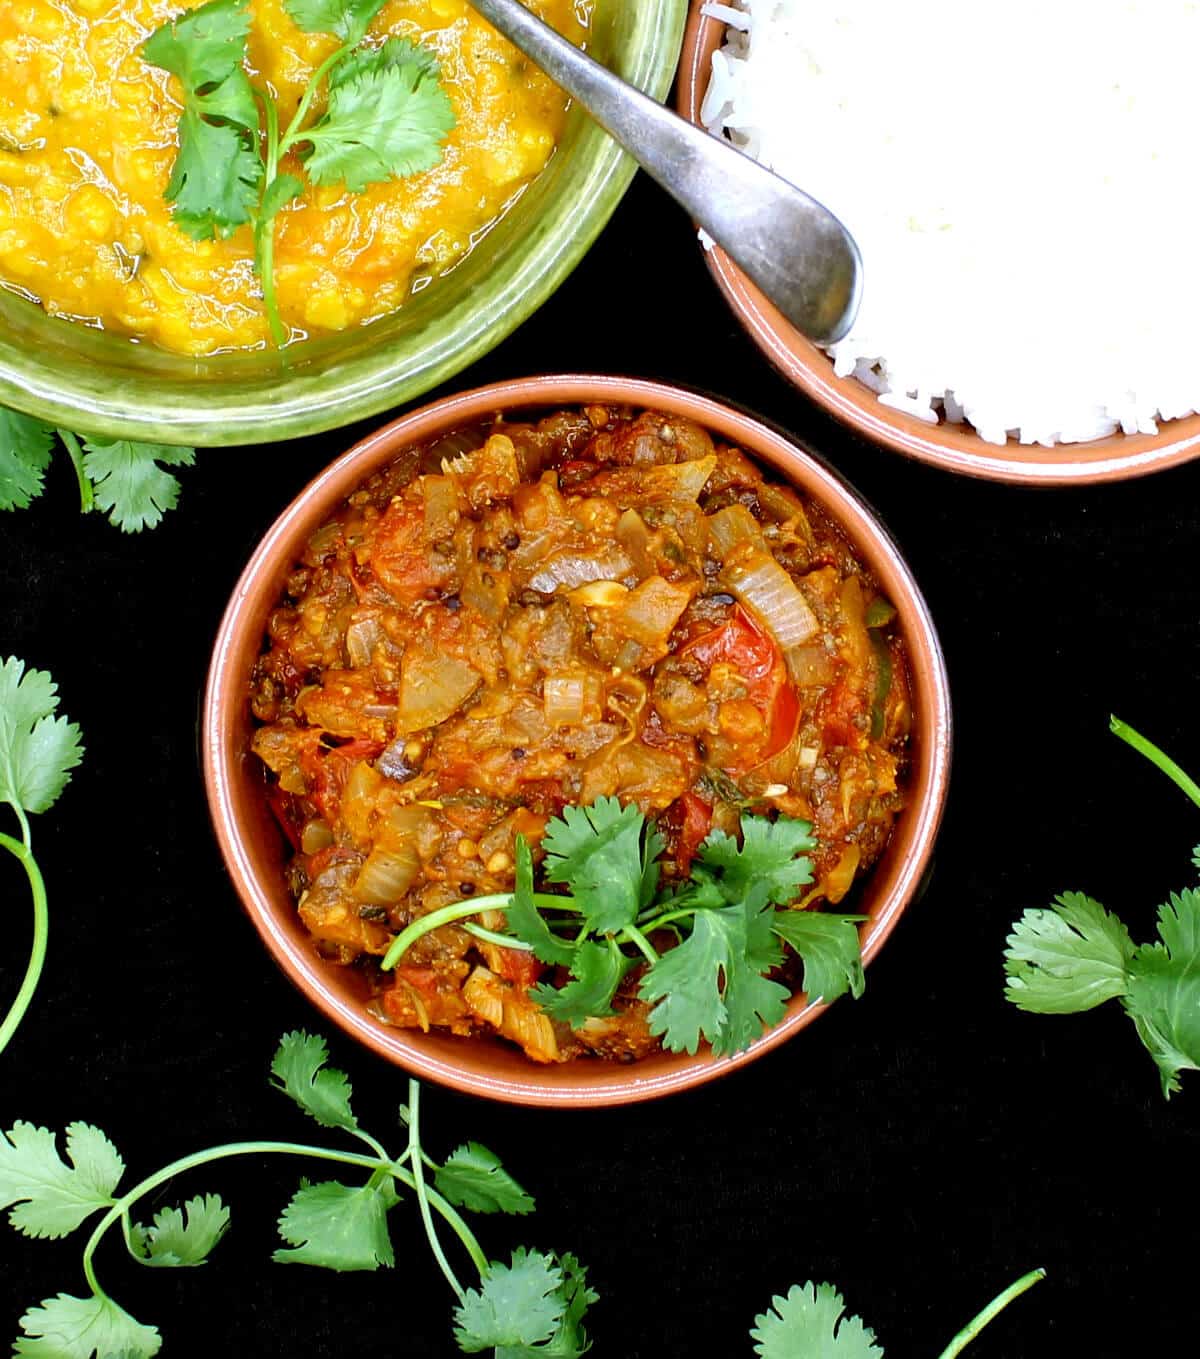 A clay dish with Baingan Bharta, mashed eggplants in a tomato onion sauce, garnished with cilantro. Next to it are tomato dal and rice with a spoon.